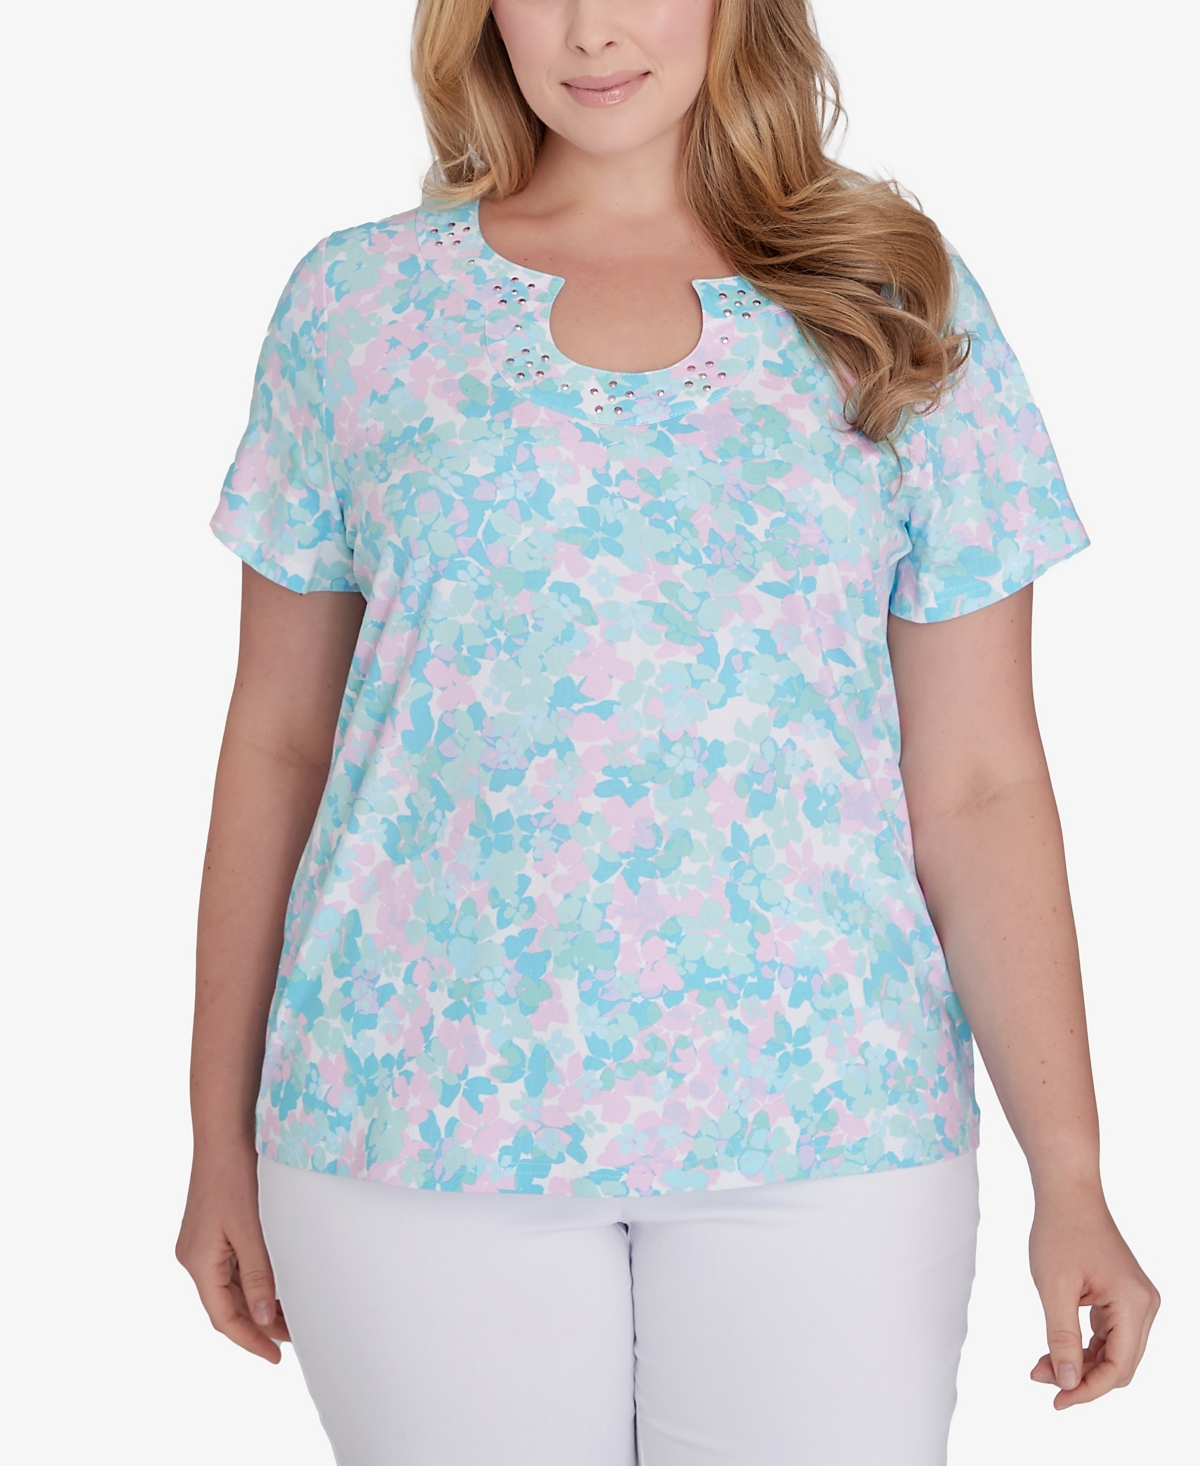 Plus Size Spring Into Action Short Sleeve Top - Mint Multi